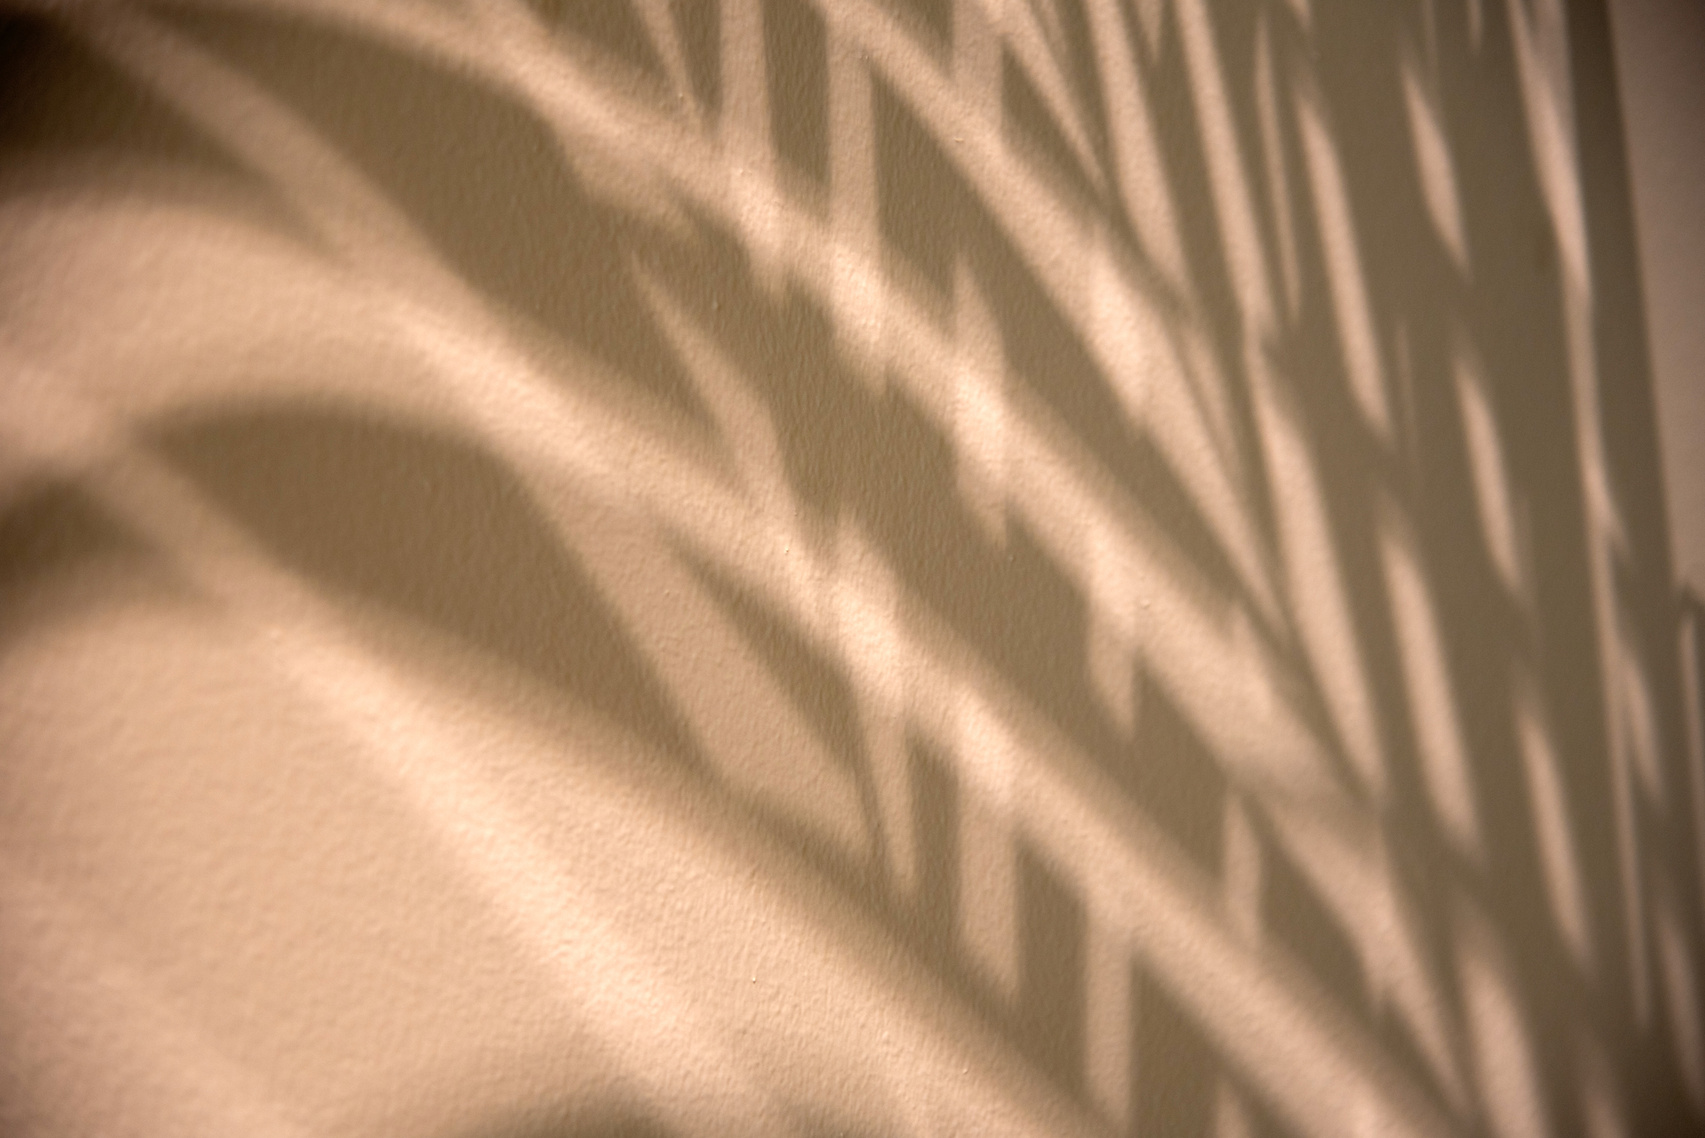 Shadow patterns on a textured wall